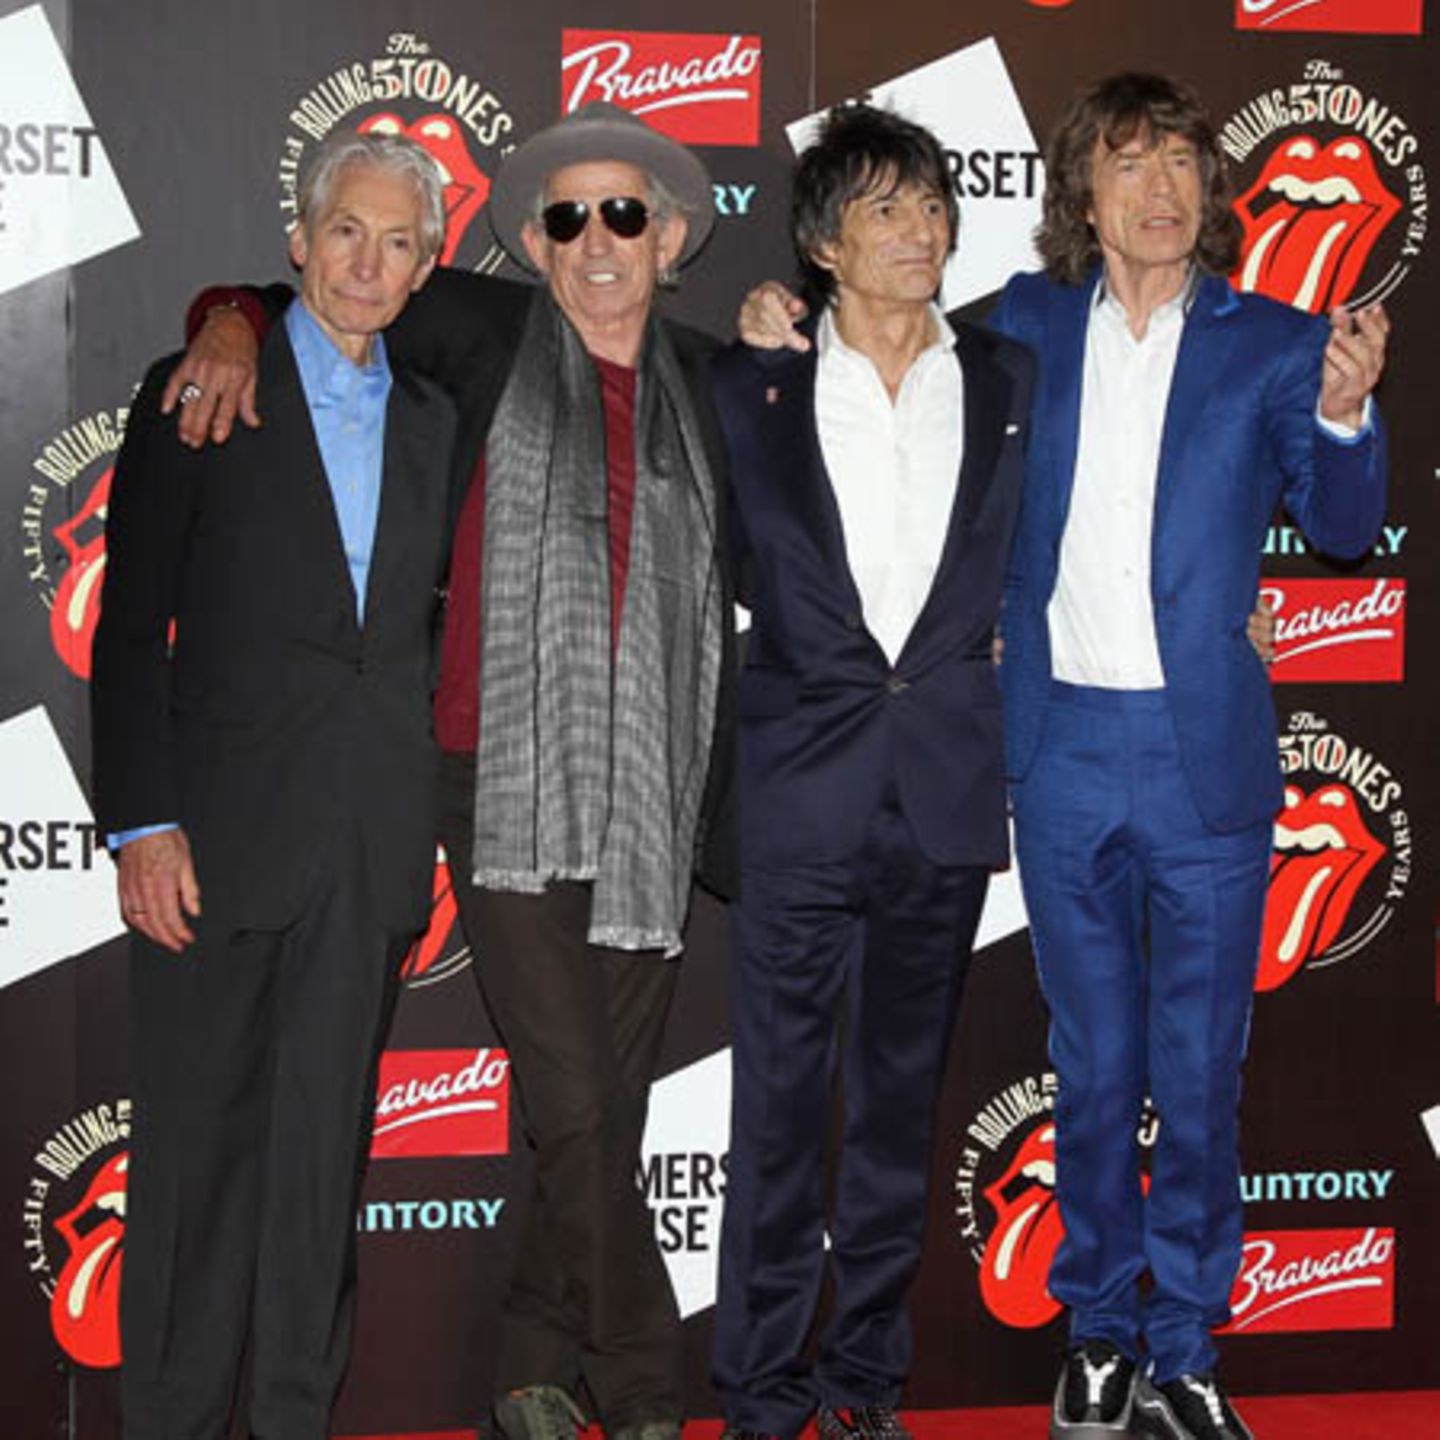 'The Rolling Stones'